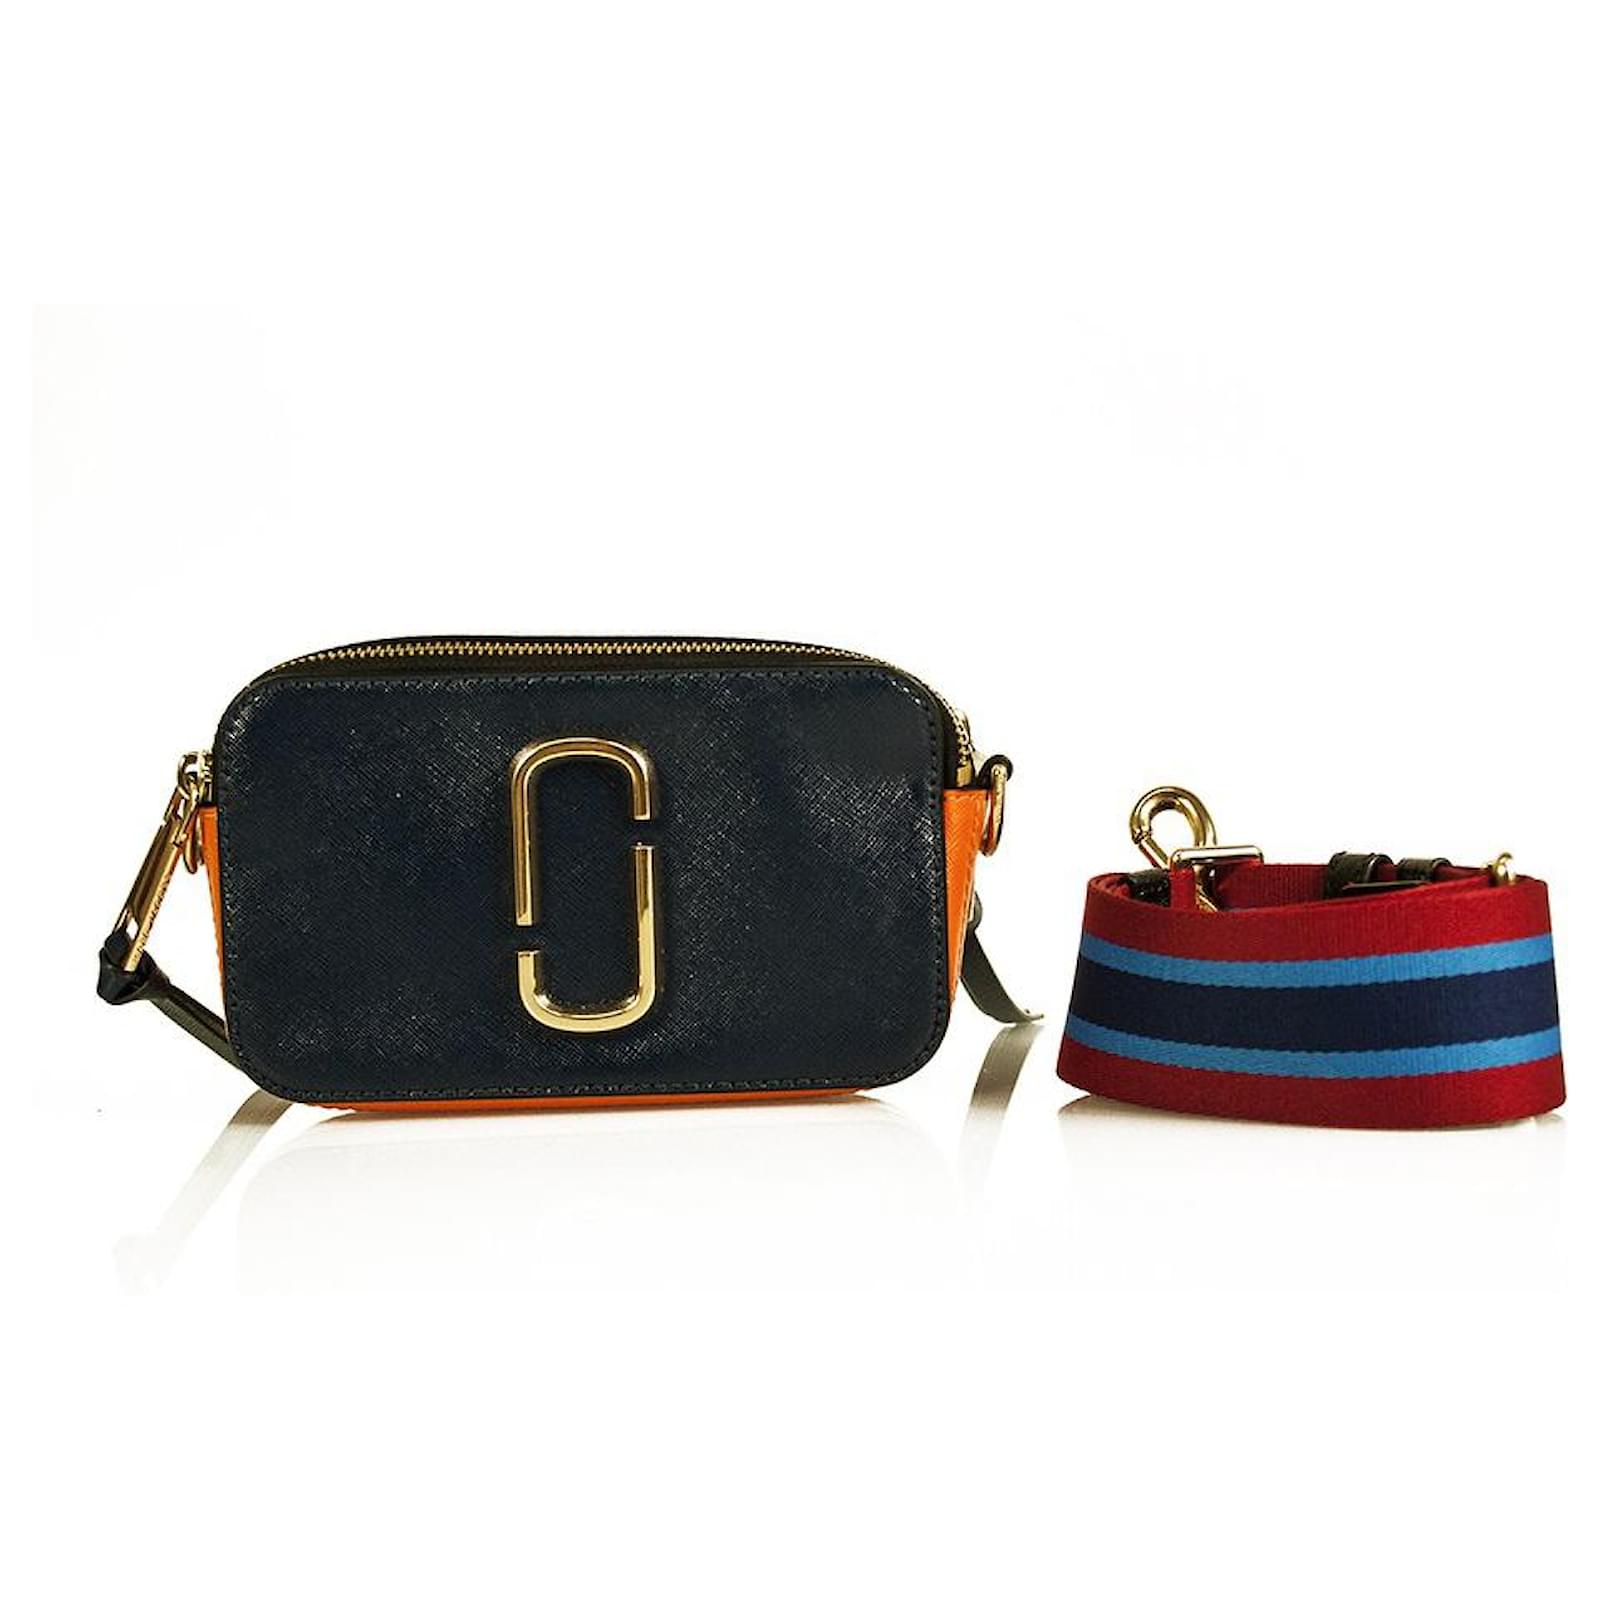 Marc Jacobs blue The Snapshot Leather Cross Body Bag